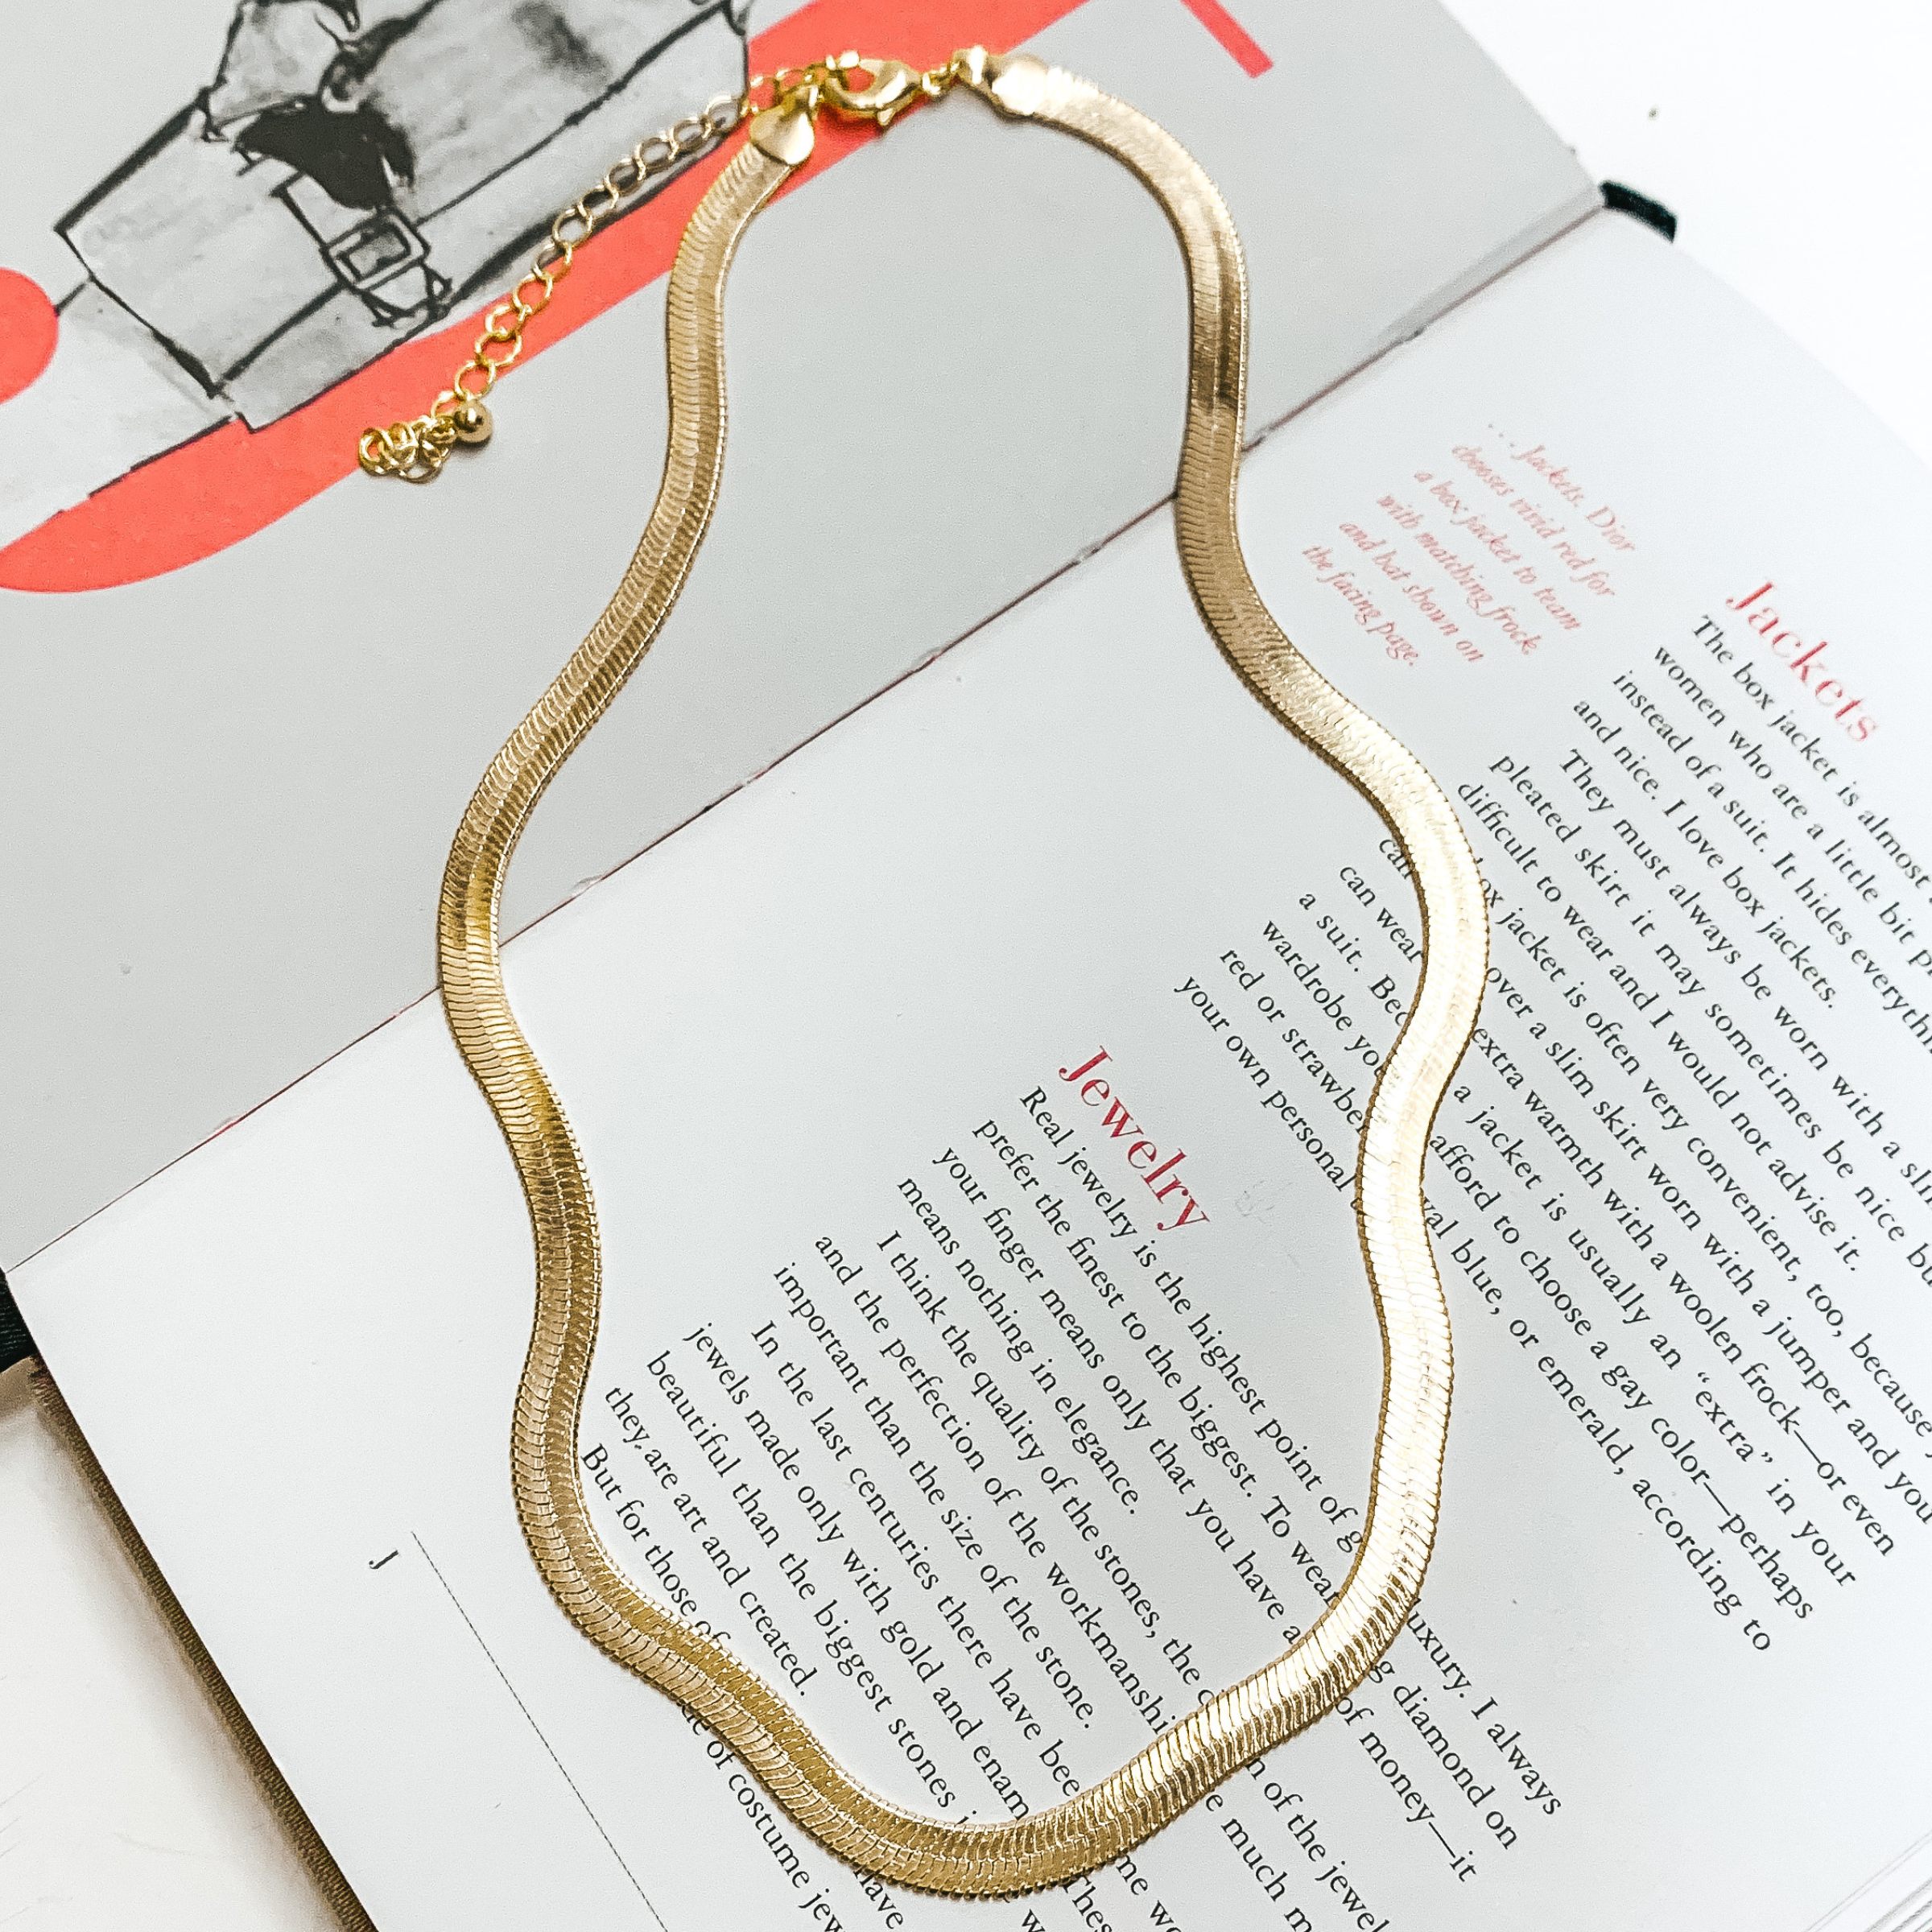 Gold herringbone chain necklace. This necklace is pictured on an open book on a white background. 